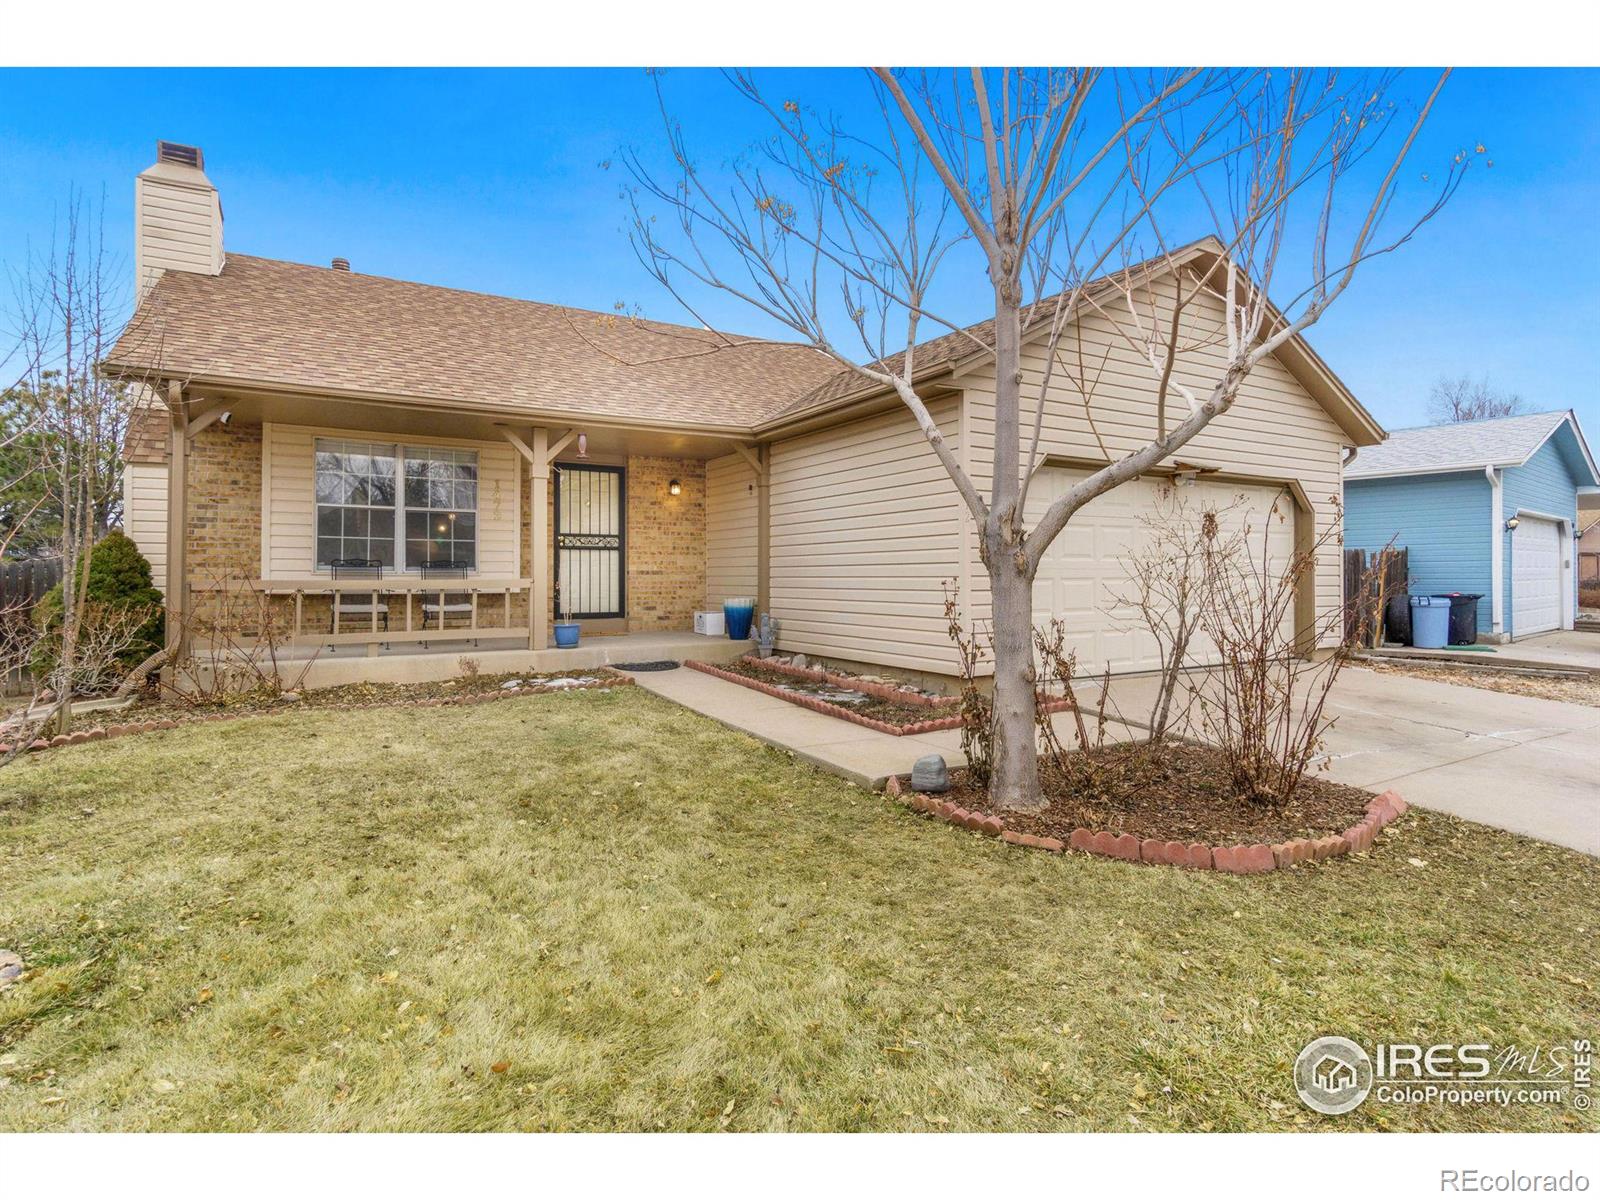 Report Image for 1472 S Cathay Street,Aurora, Colorado